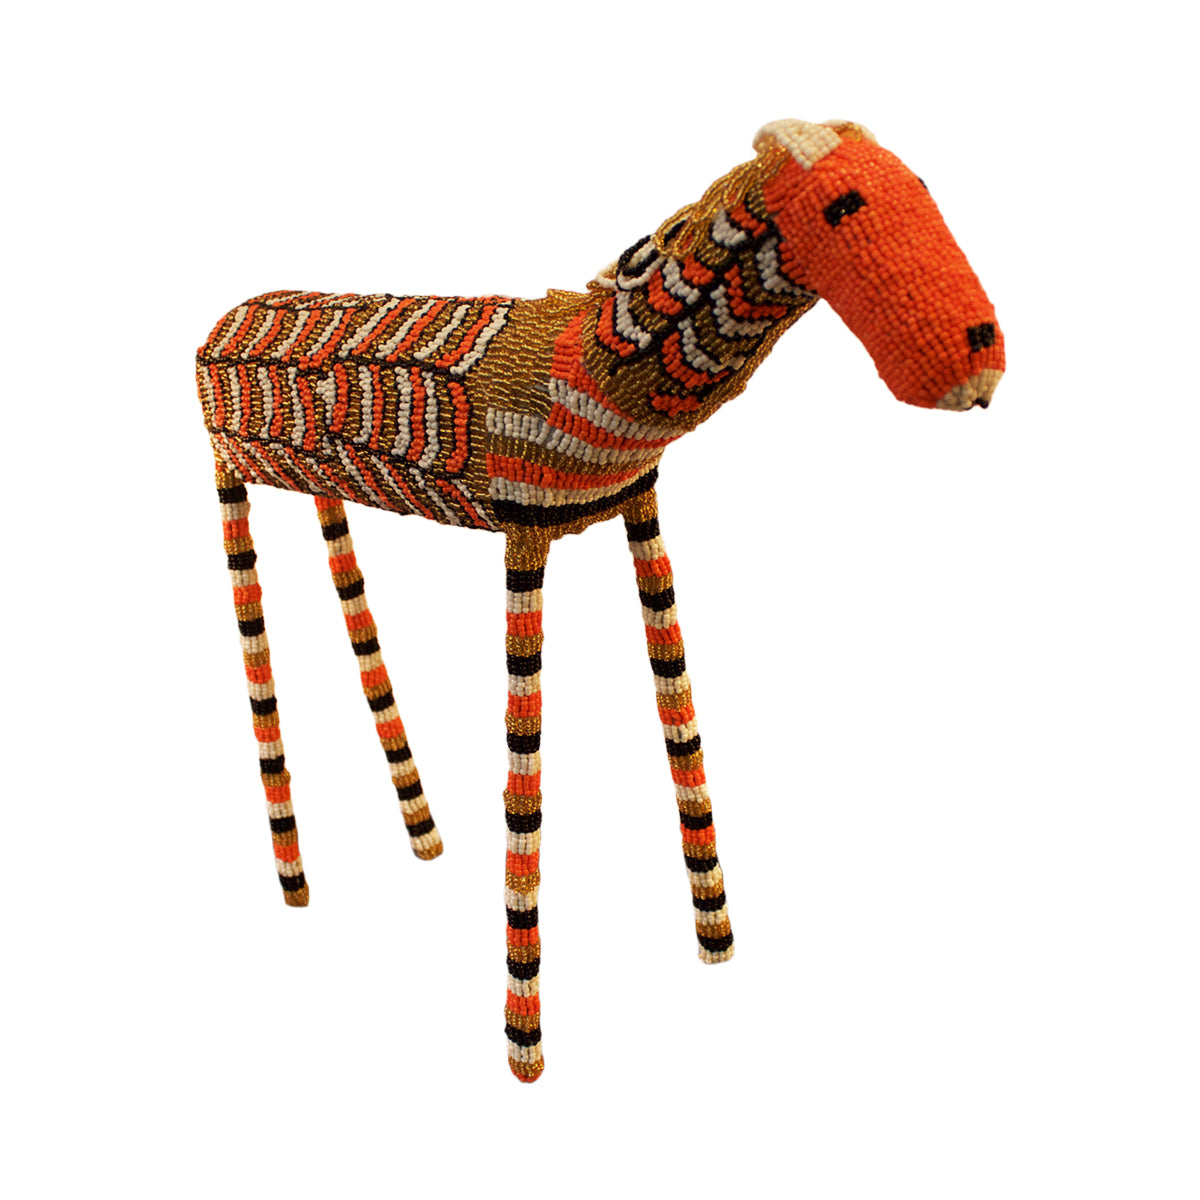 Beaded horse handcrafted by female artisans in Africa. These joyful sculptures add whimsy and colour to any room.